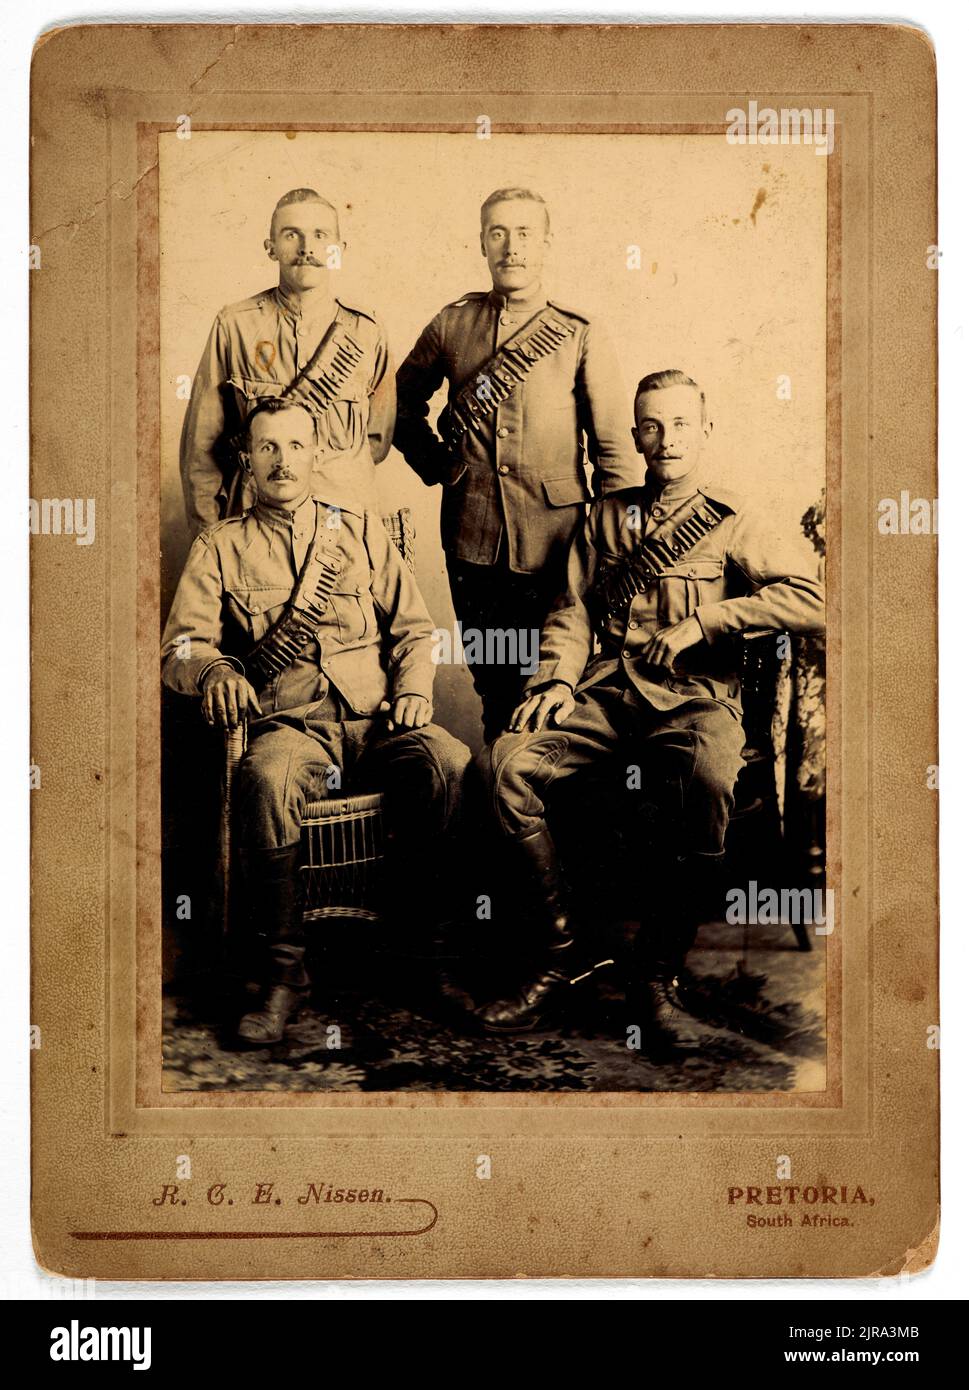 Group portrait of four members of the New Zealand Mounted Rifles on active service in South Africa., 1900-1901, Pretoria, by Robinson Christian Englestoft Nissen. Stock Photo